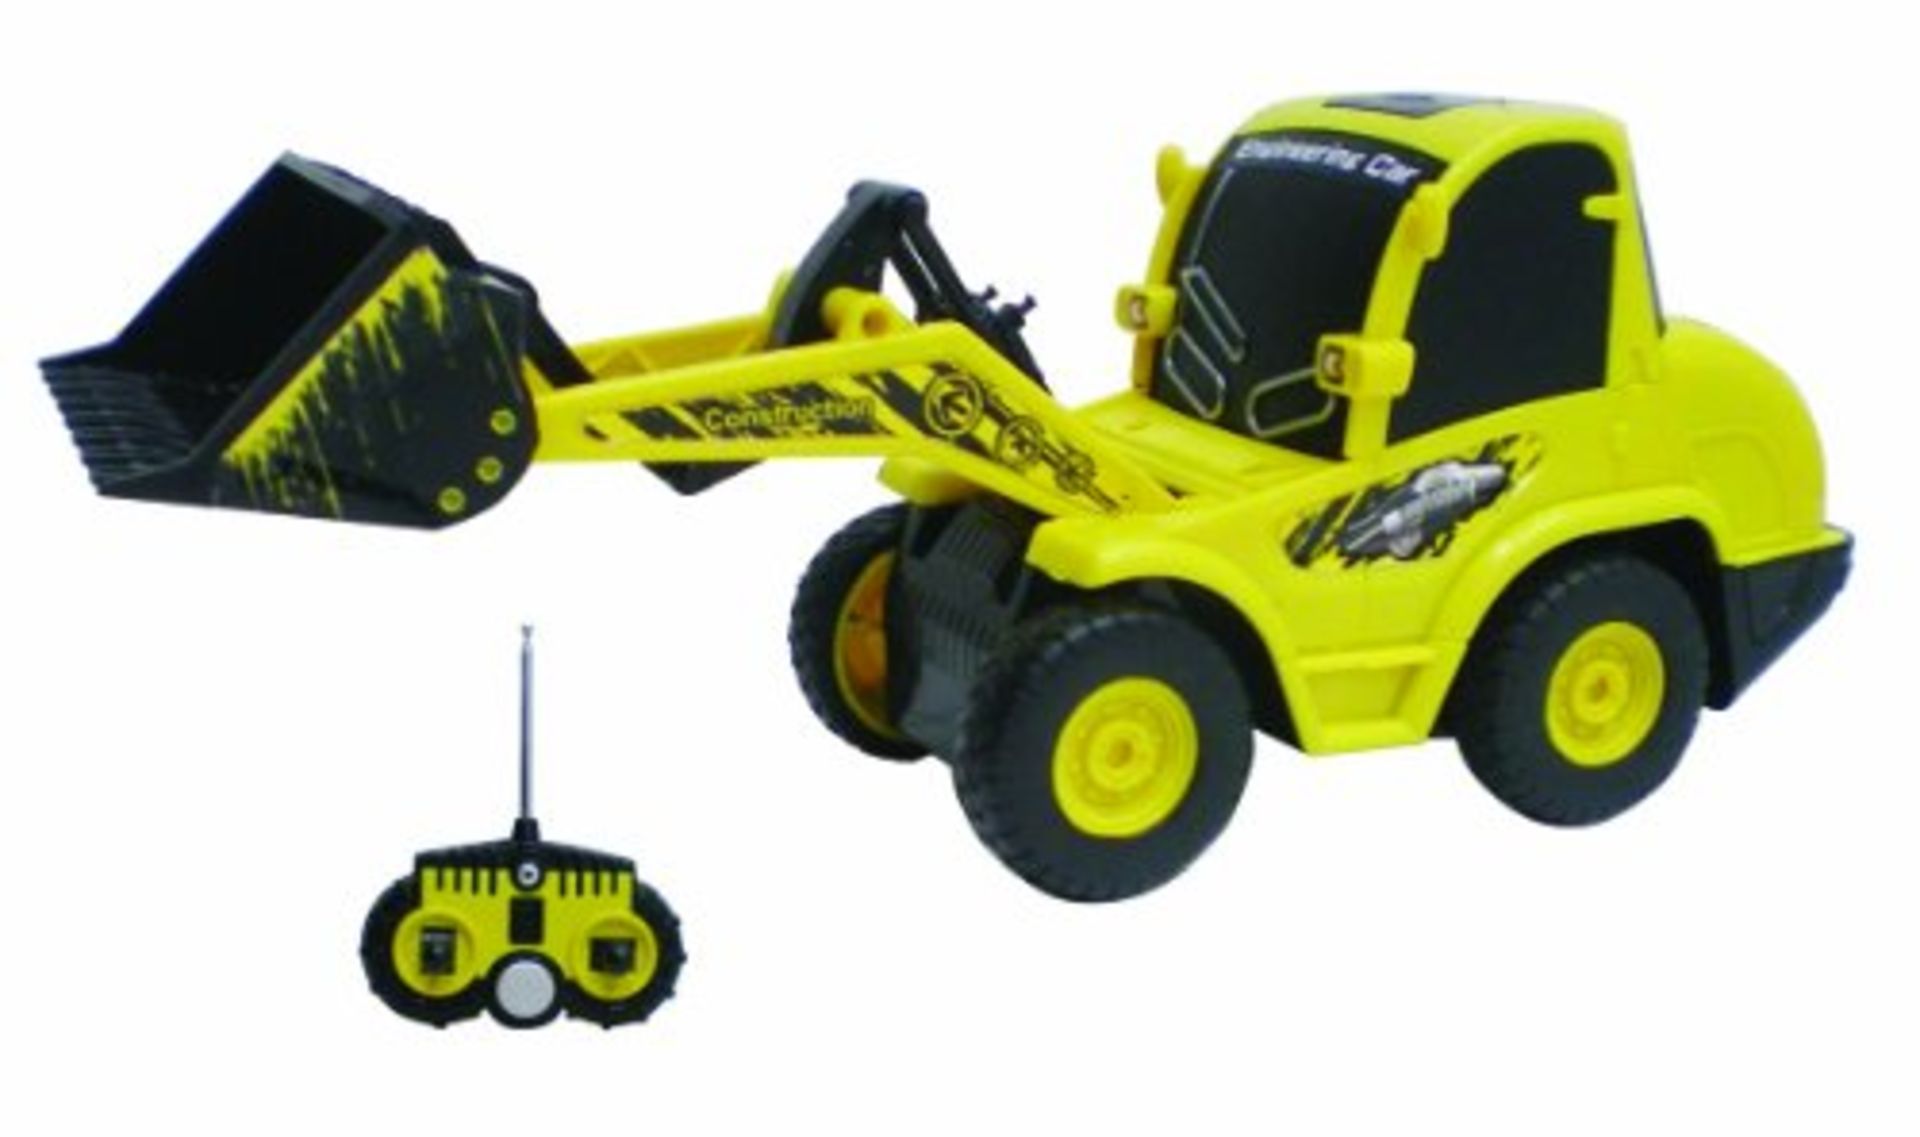 V *TRADE QTY* Brand New Radio Control Construction Digger 1:20 RRP ú79.99 X 4 YOUR BID PRICE TO BE